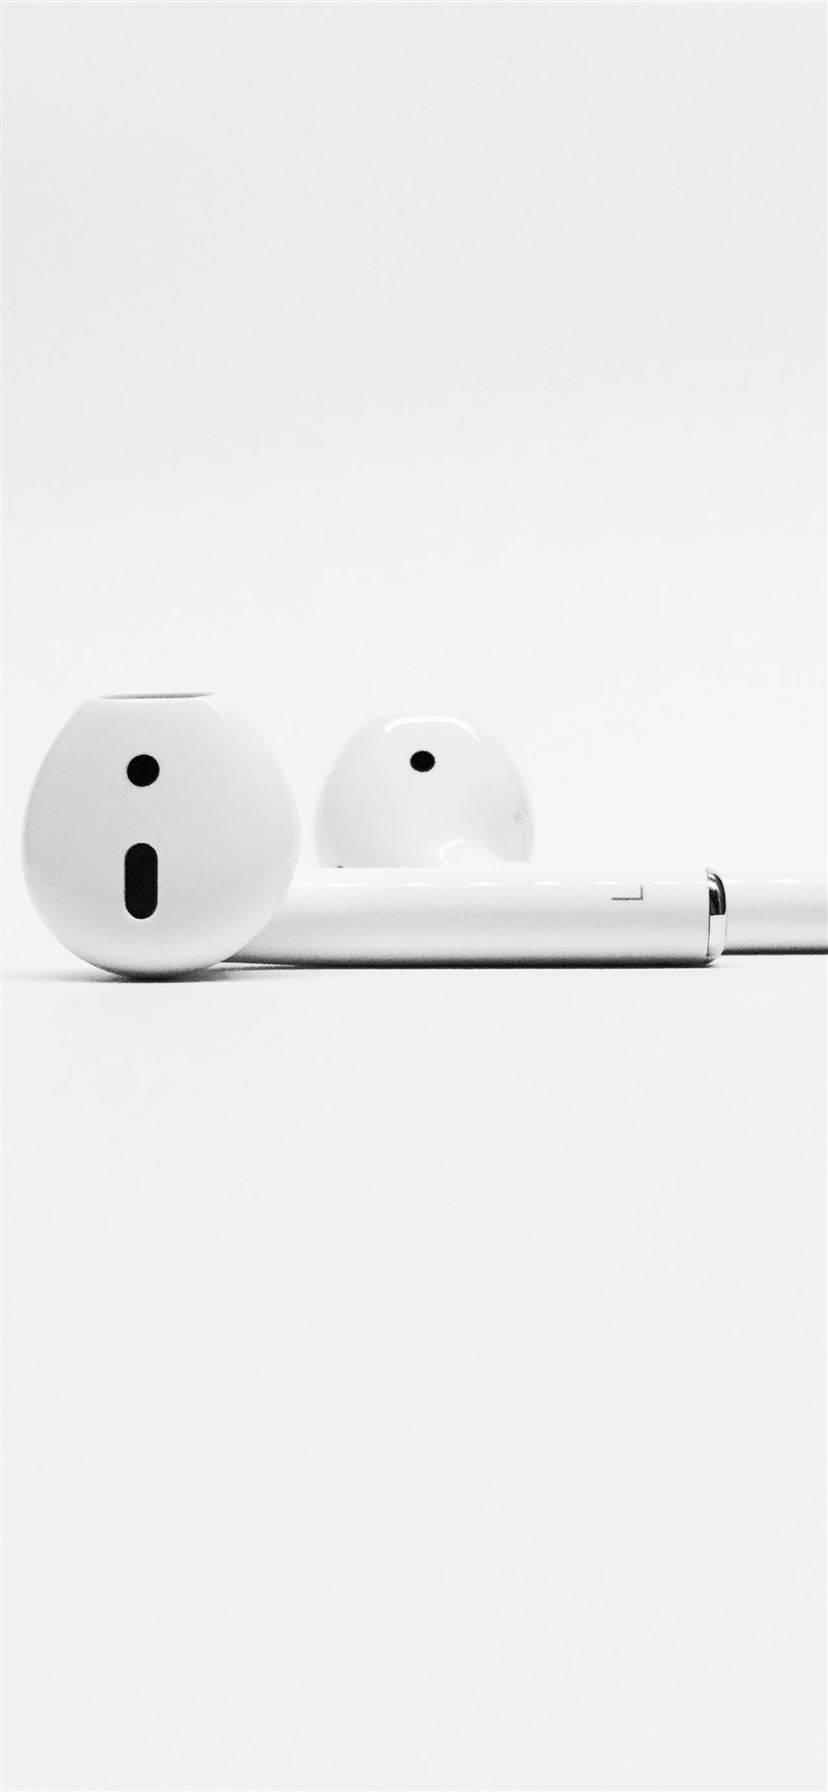 White Iphone Airpods Wallpaper